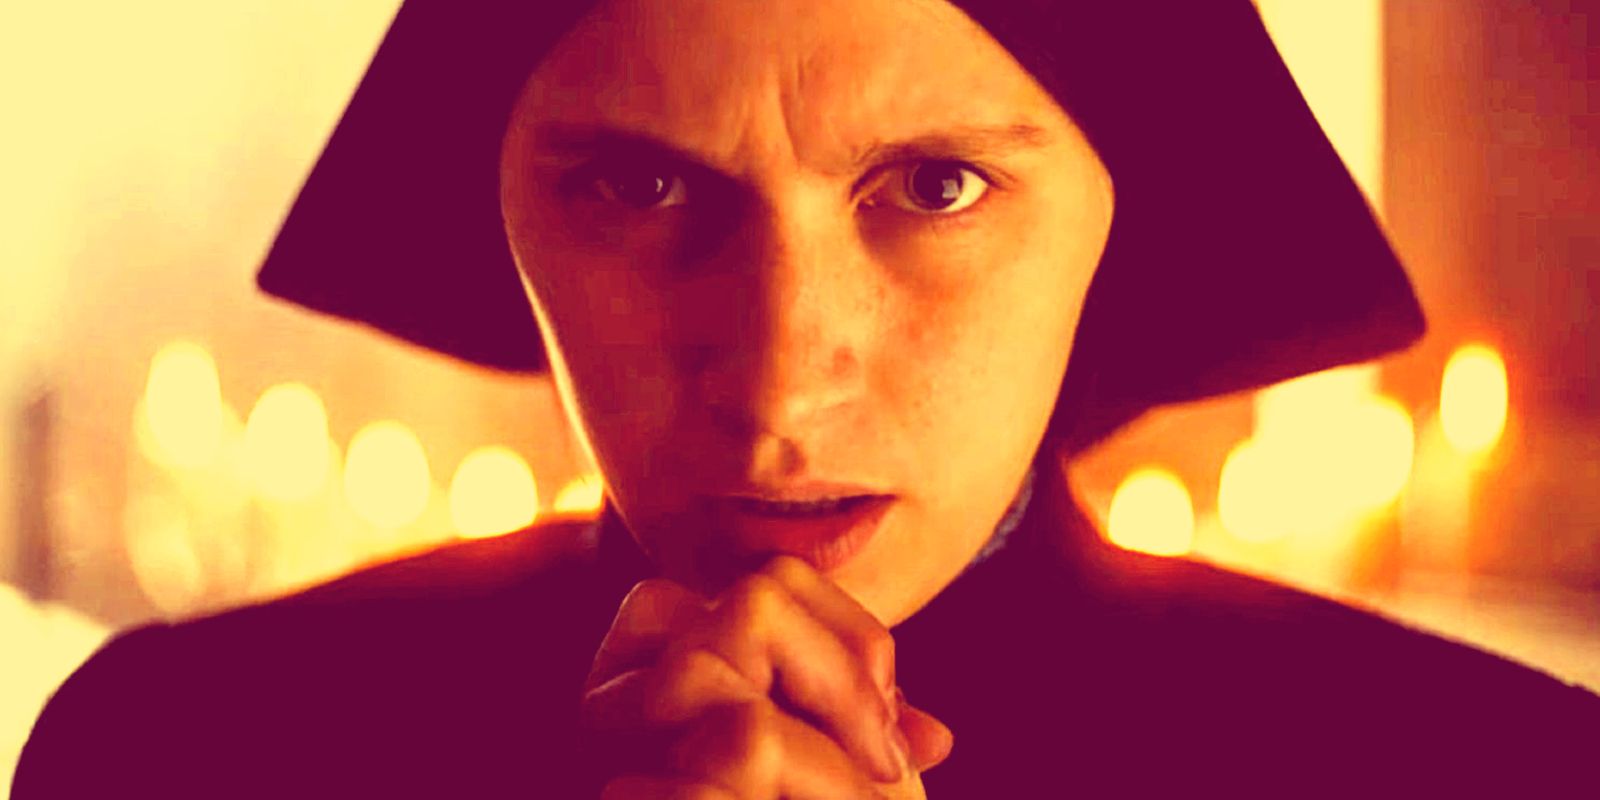 A nun clasps her hands together while praying in The First Omen.